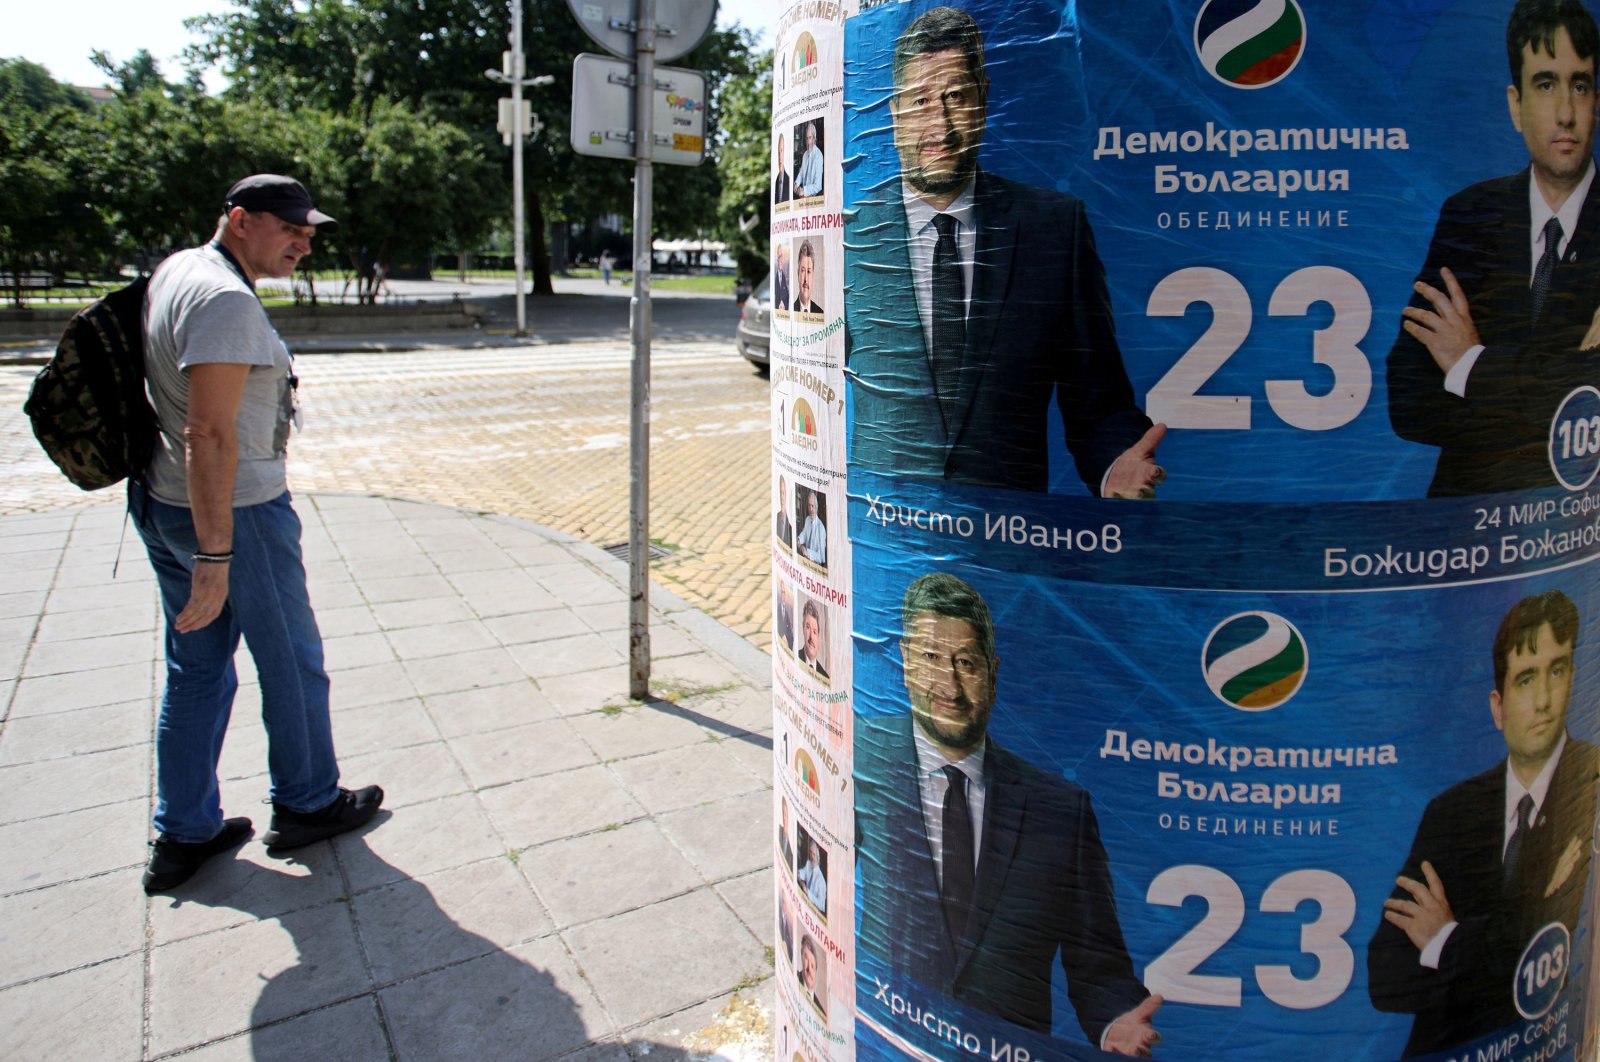 A man walks past election posters of the Democratic Bulgaria party in Sofia, Bulgaria, July 8, 2021. (Reuters Photo)